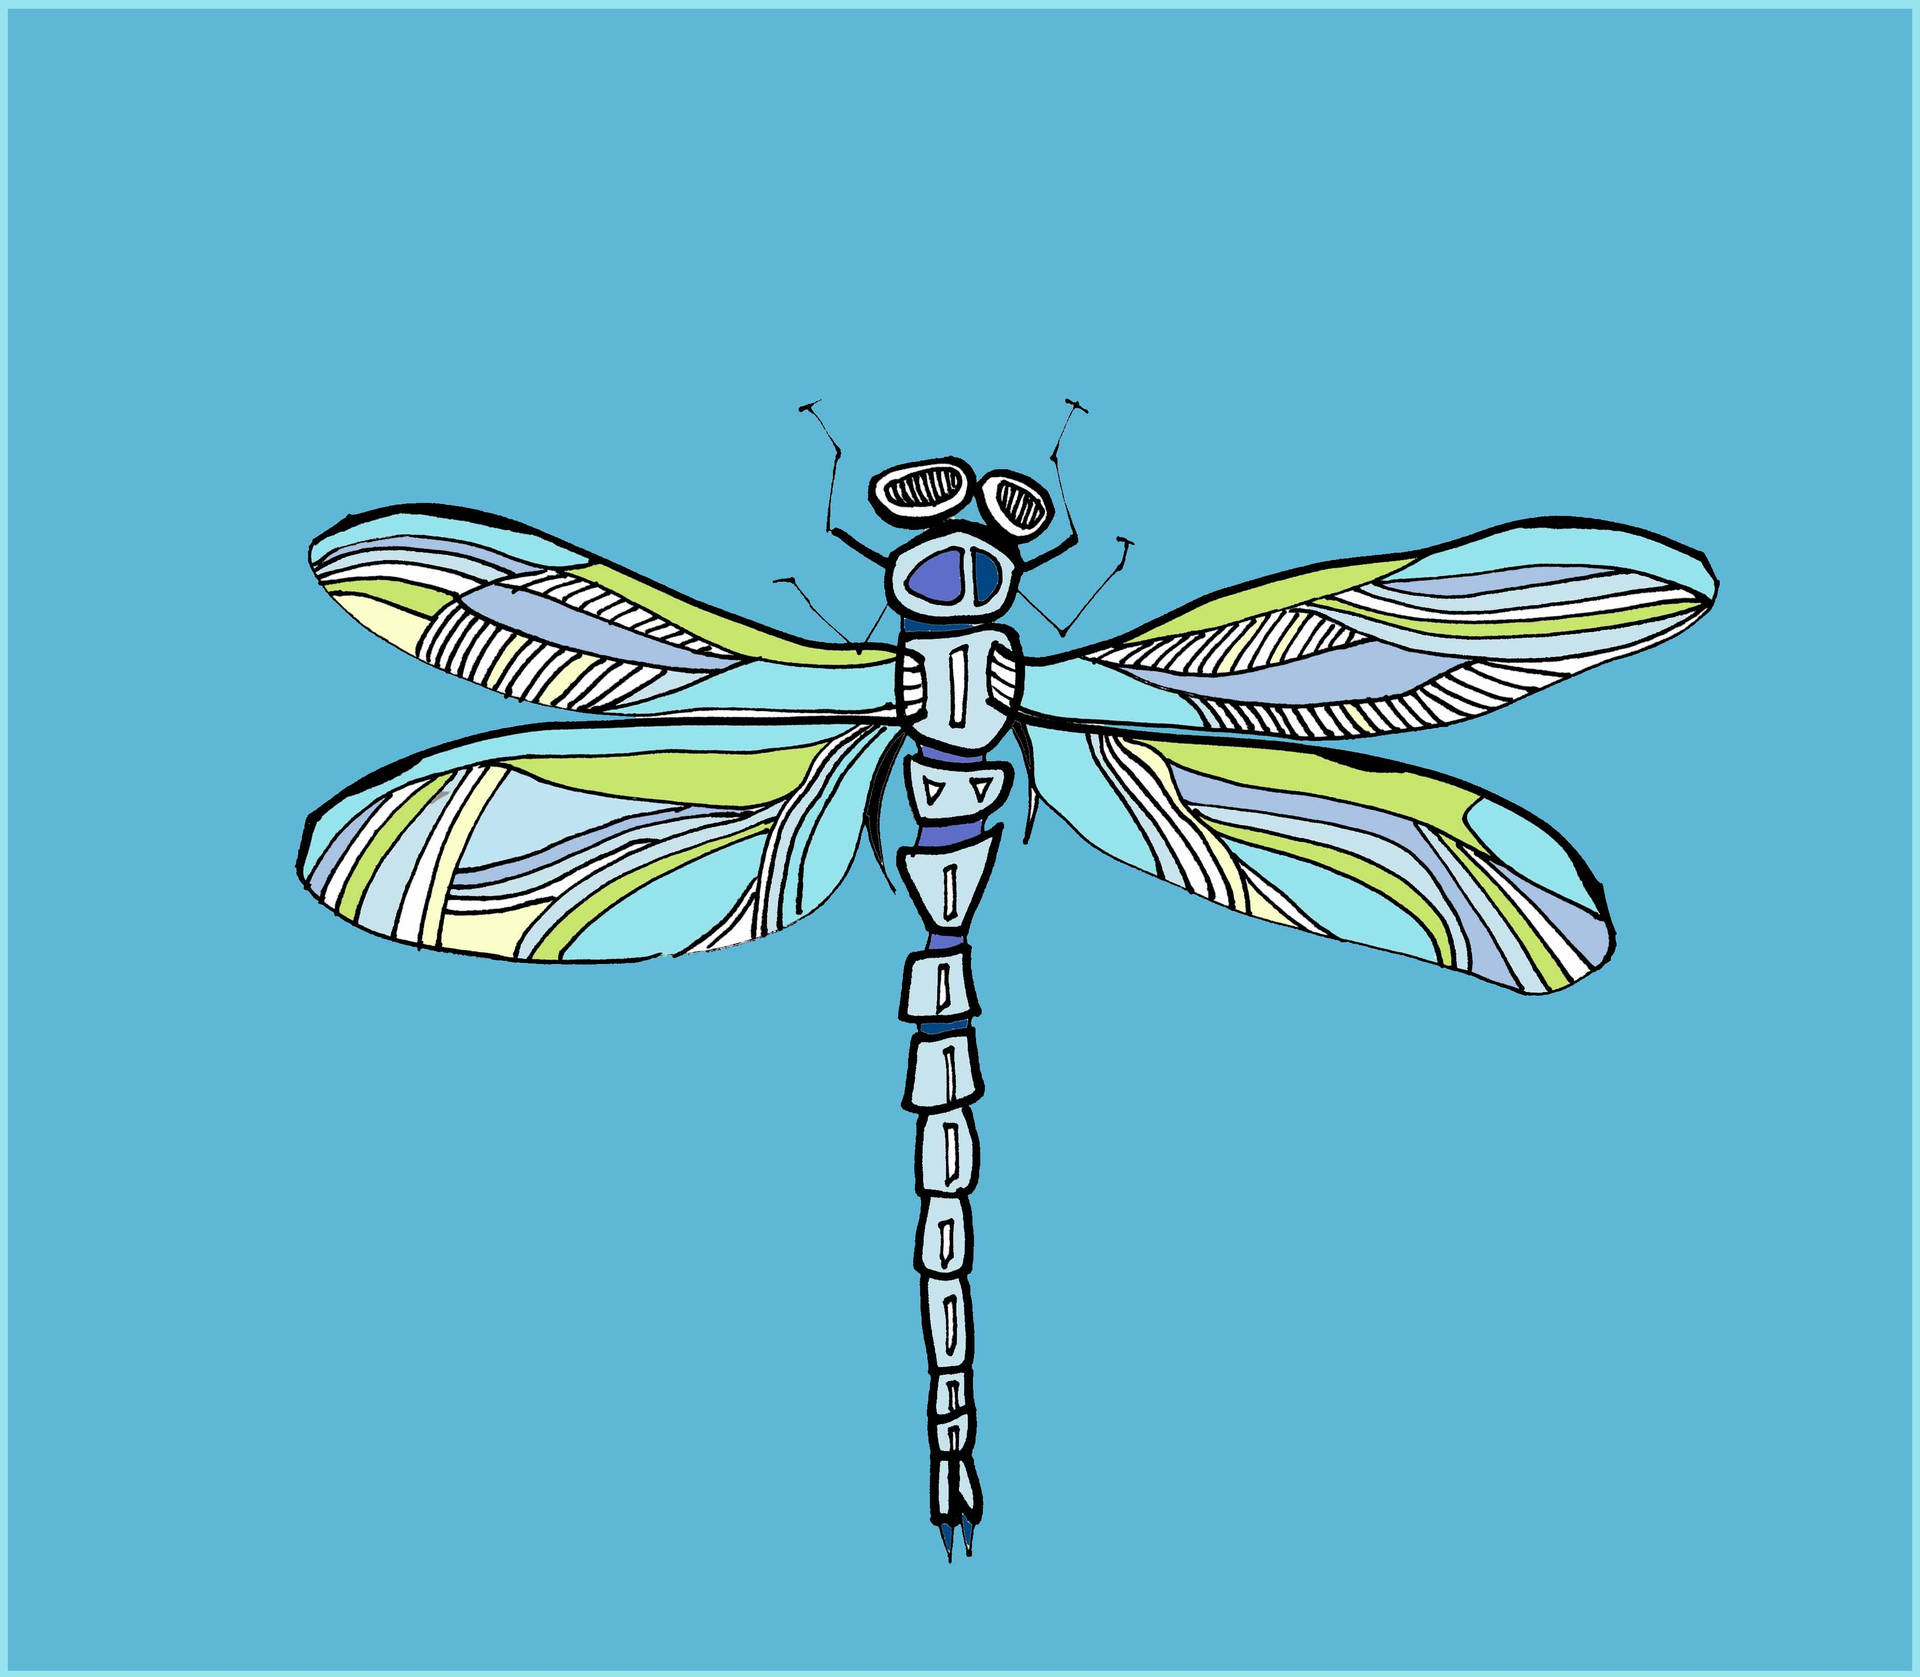 Exquisite Blue Dragonfly in Artistic Vector Illustration Wallpaper